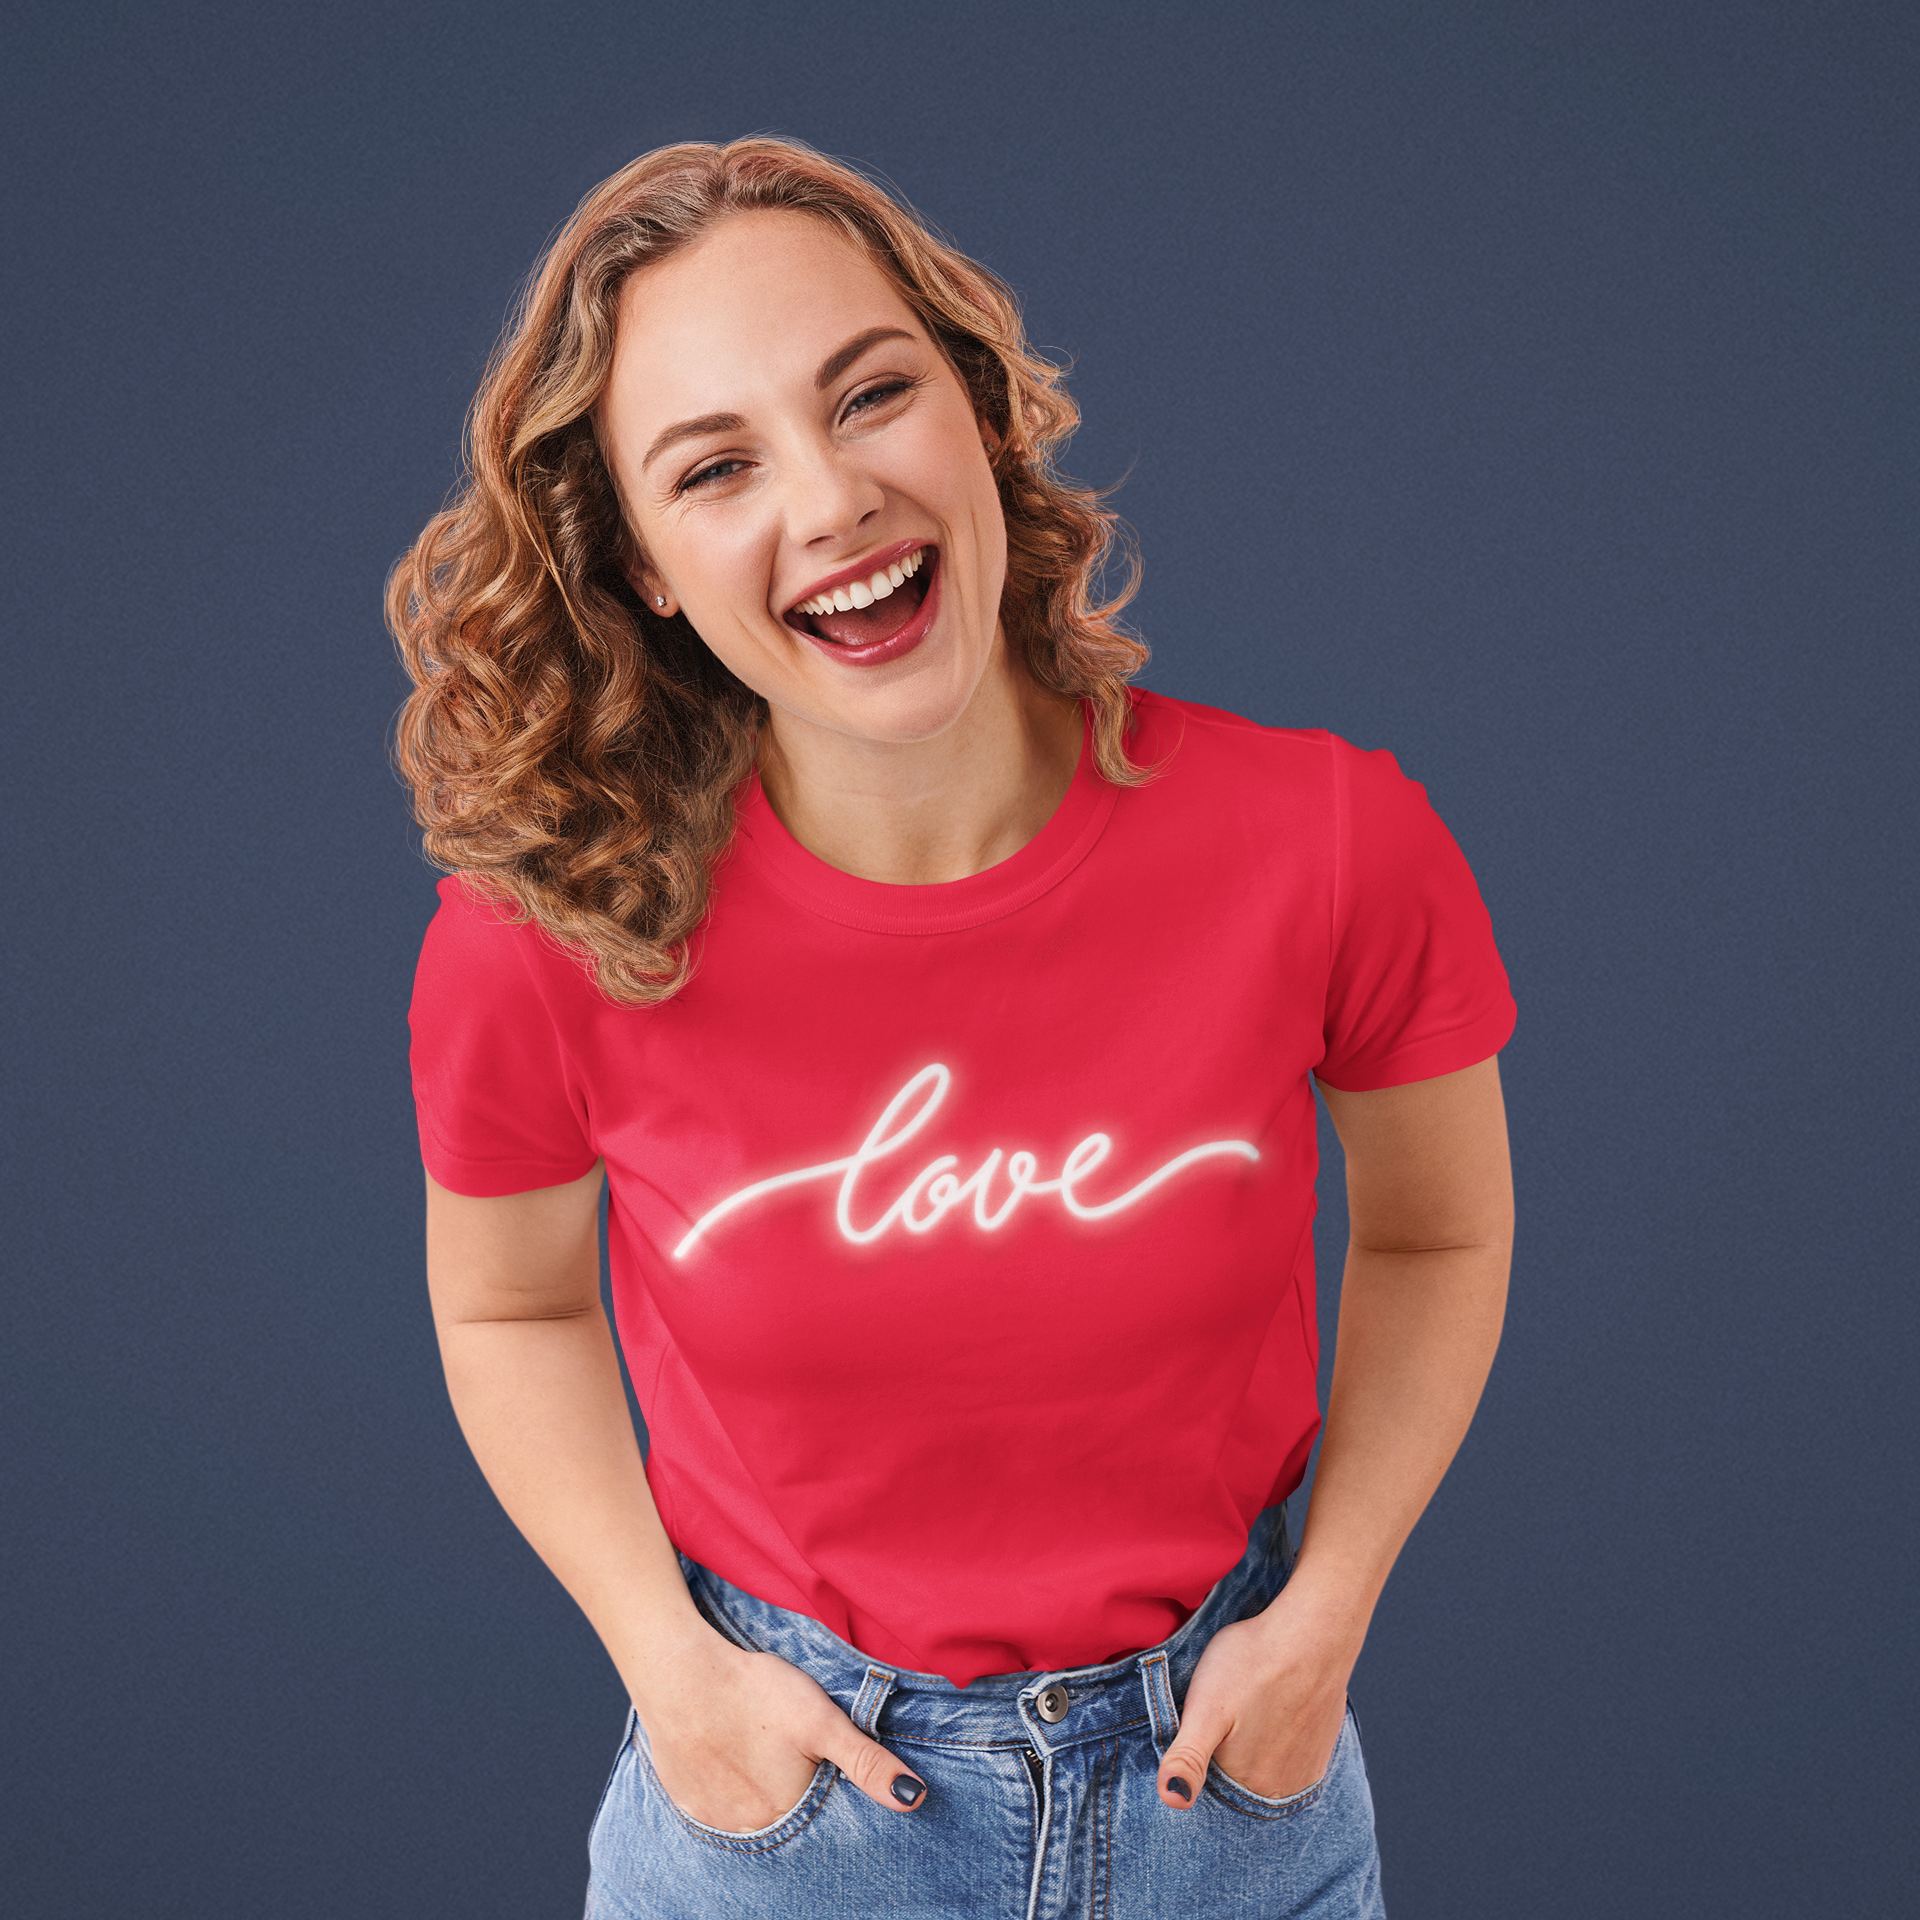 love-t-shirt-love-shirt-love-tee-newlywed-gift-gift-for-girlfriend-gift-for-wife-gift-for-him-gift-for-her-engagement-tee-unisex-cotton-tee